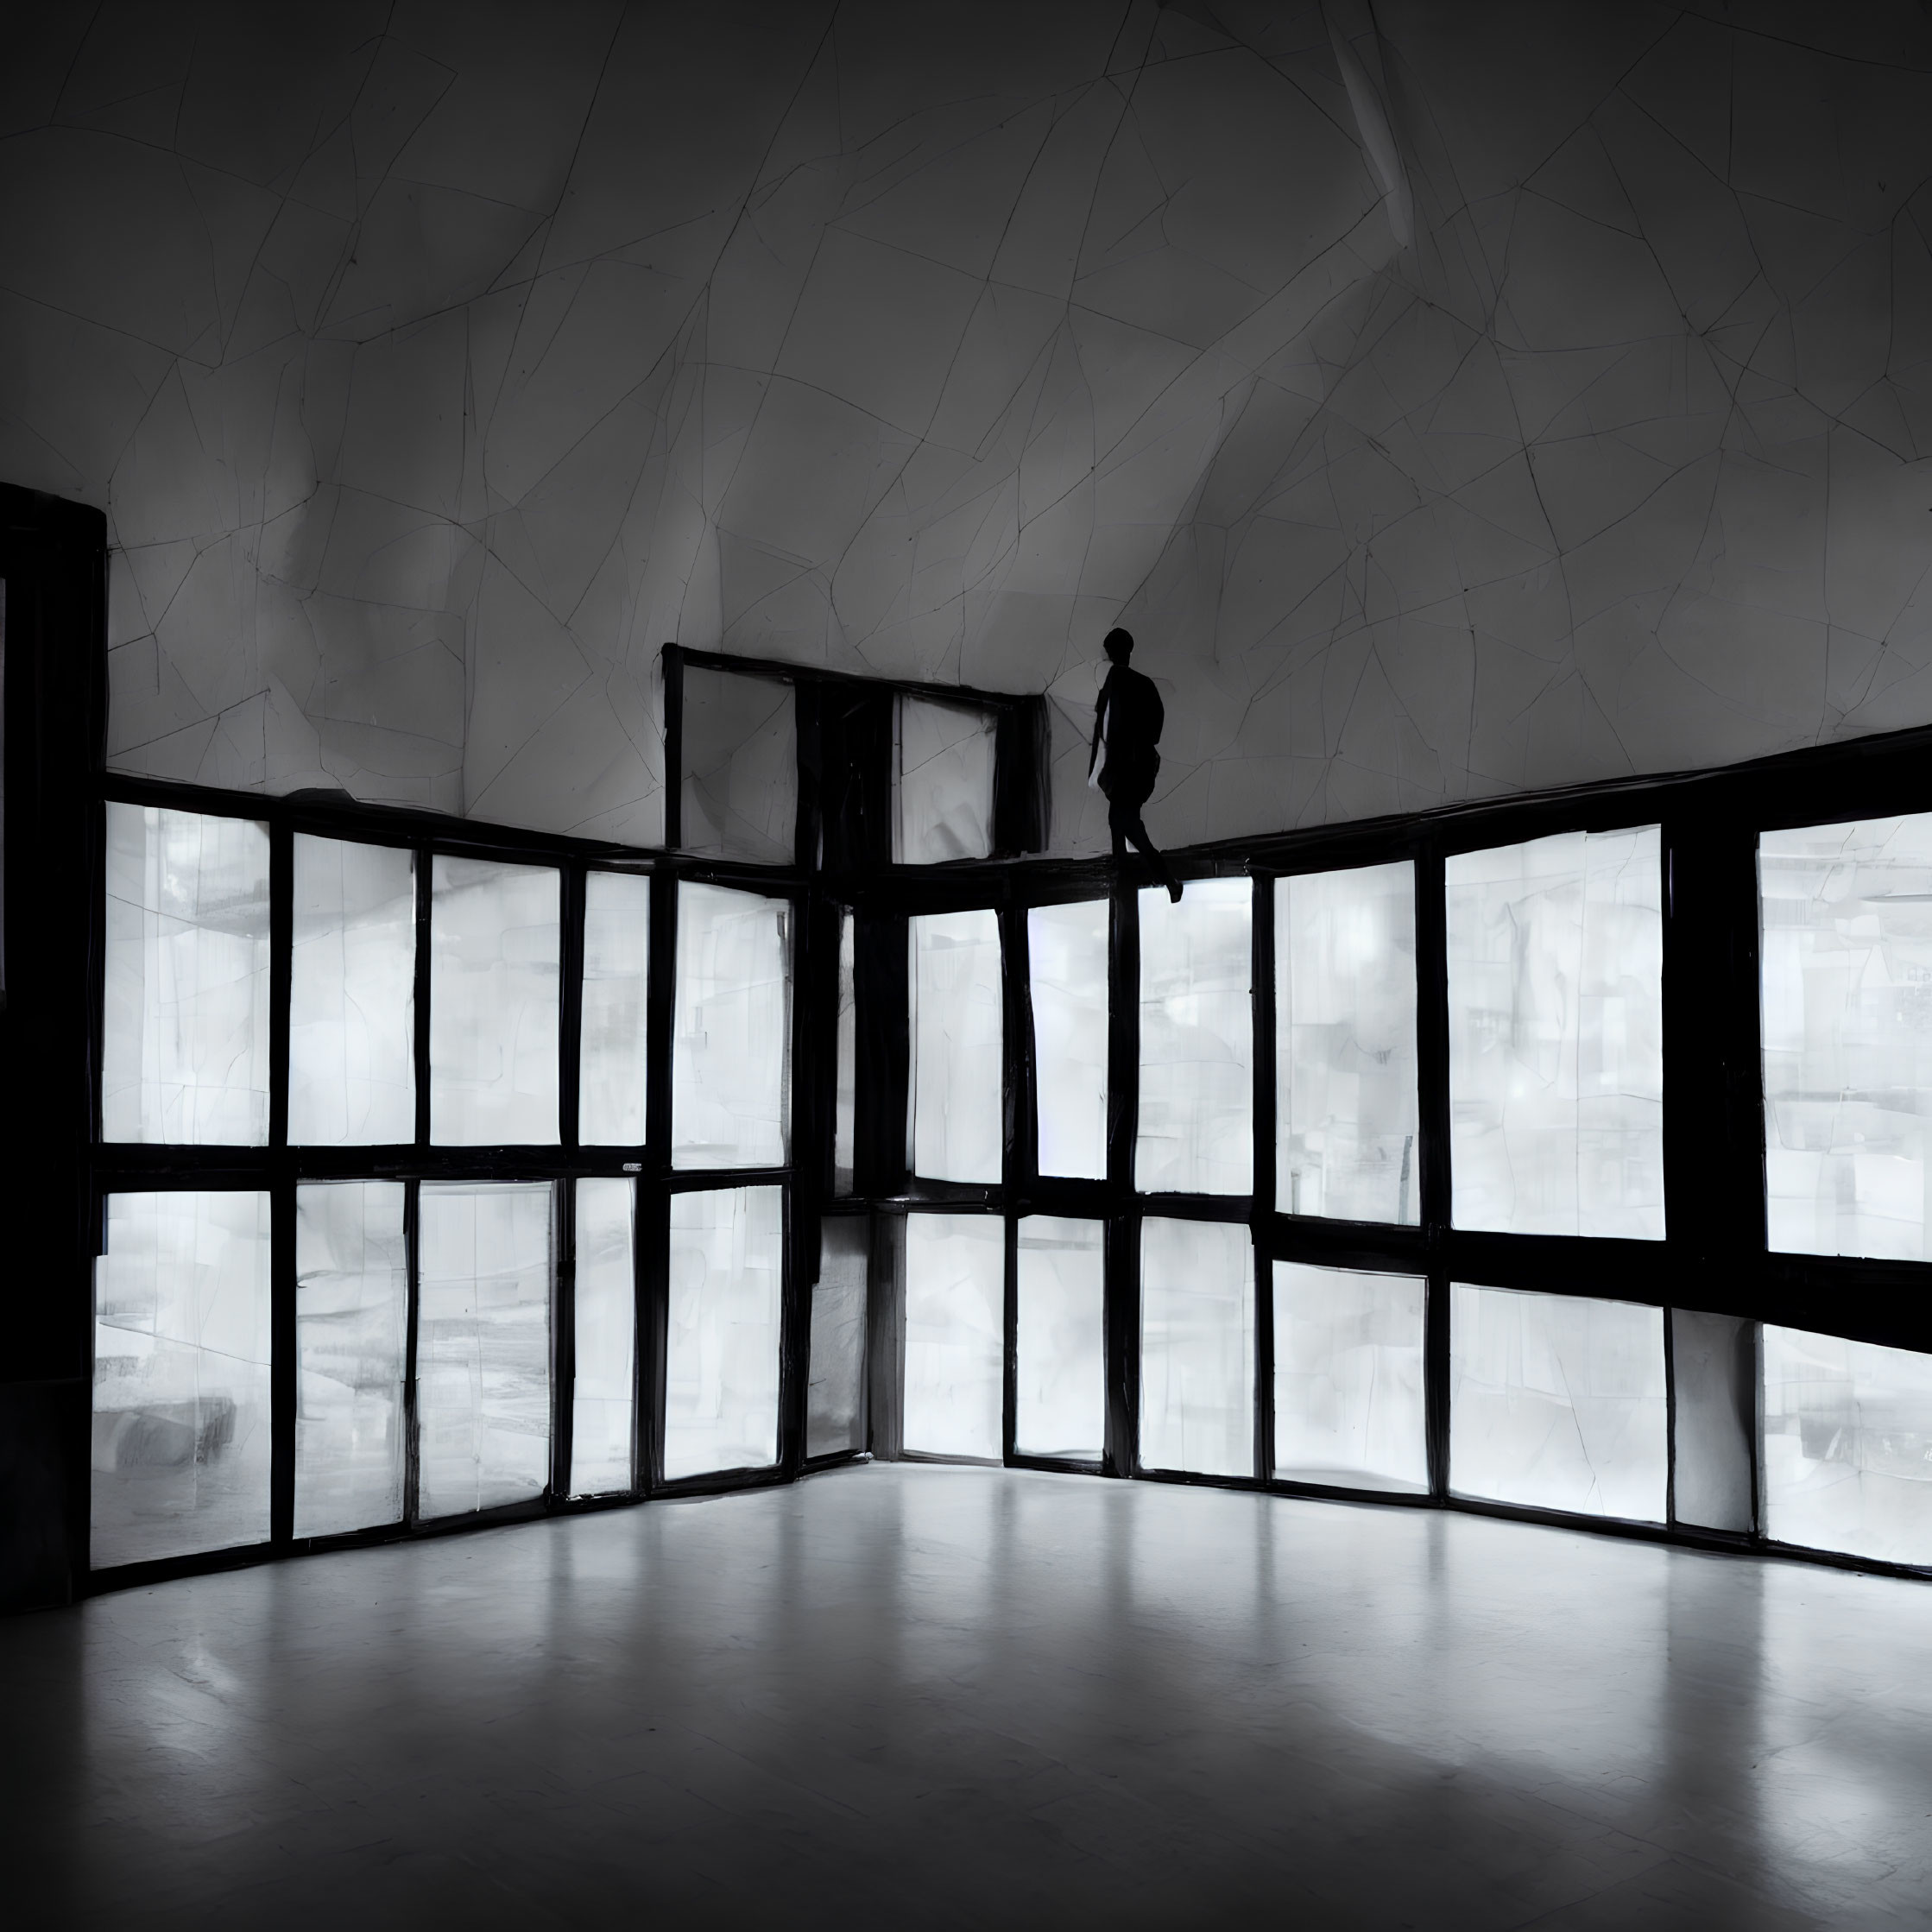 Silhouette of person in room with large windows and geometric patterns